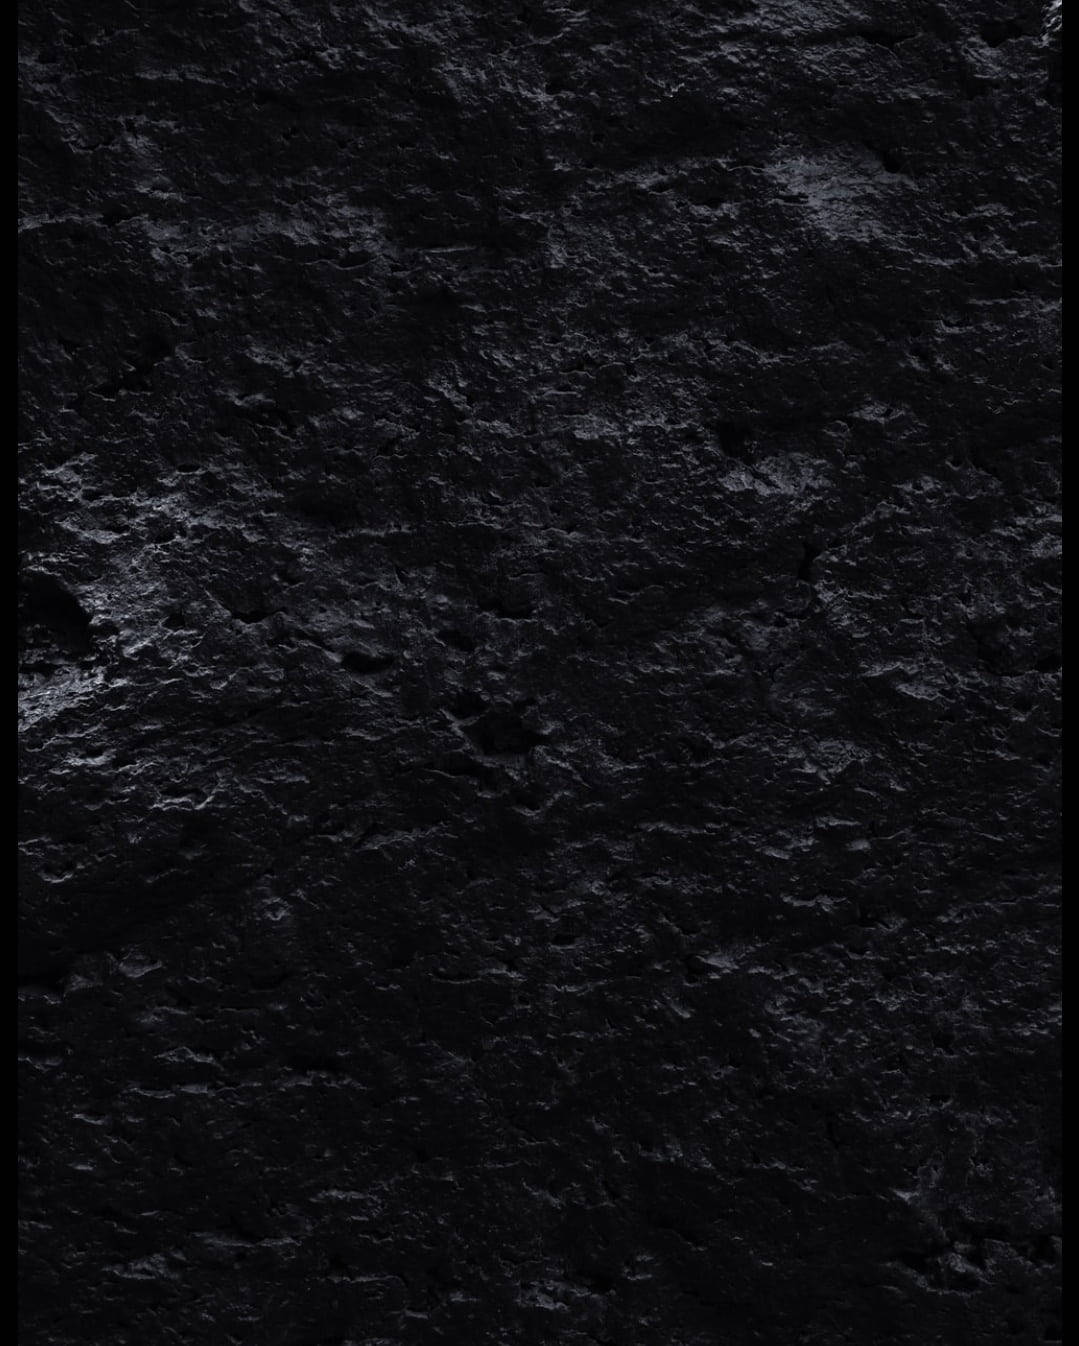 Dark Wall With Rocky Texture Wallpaper